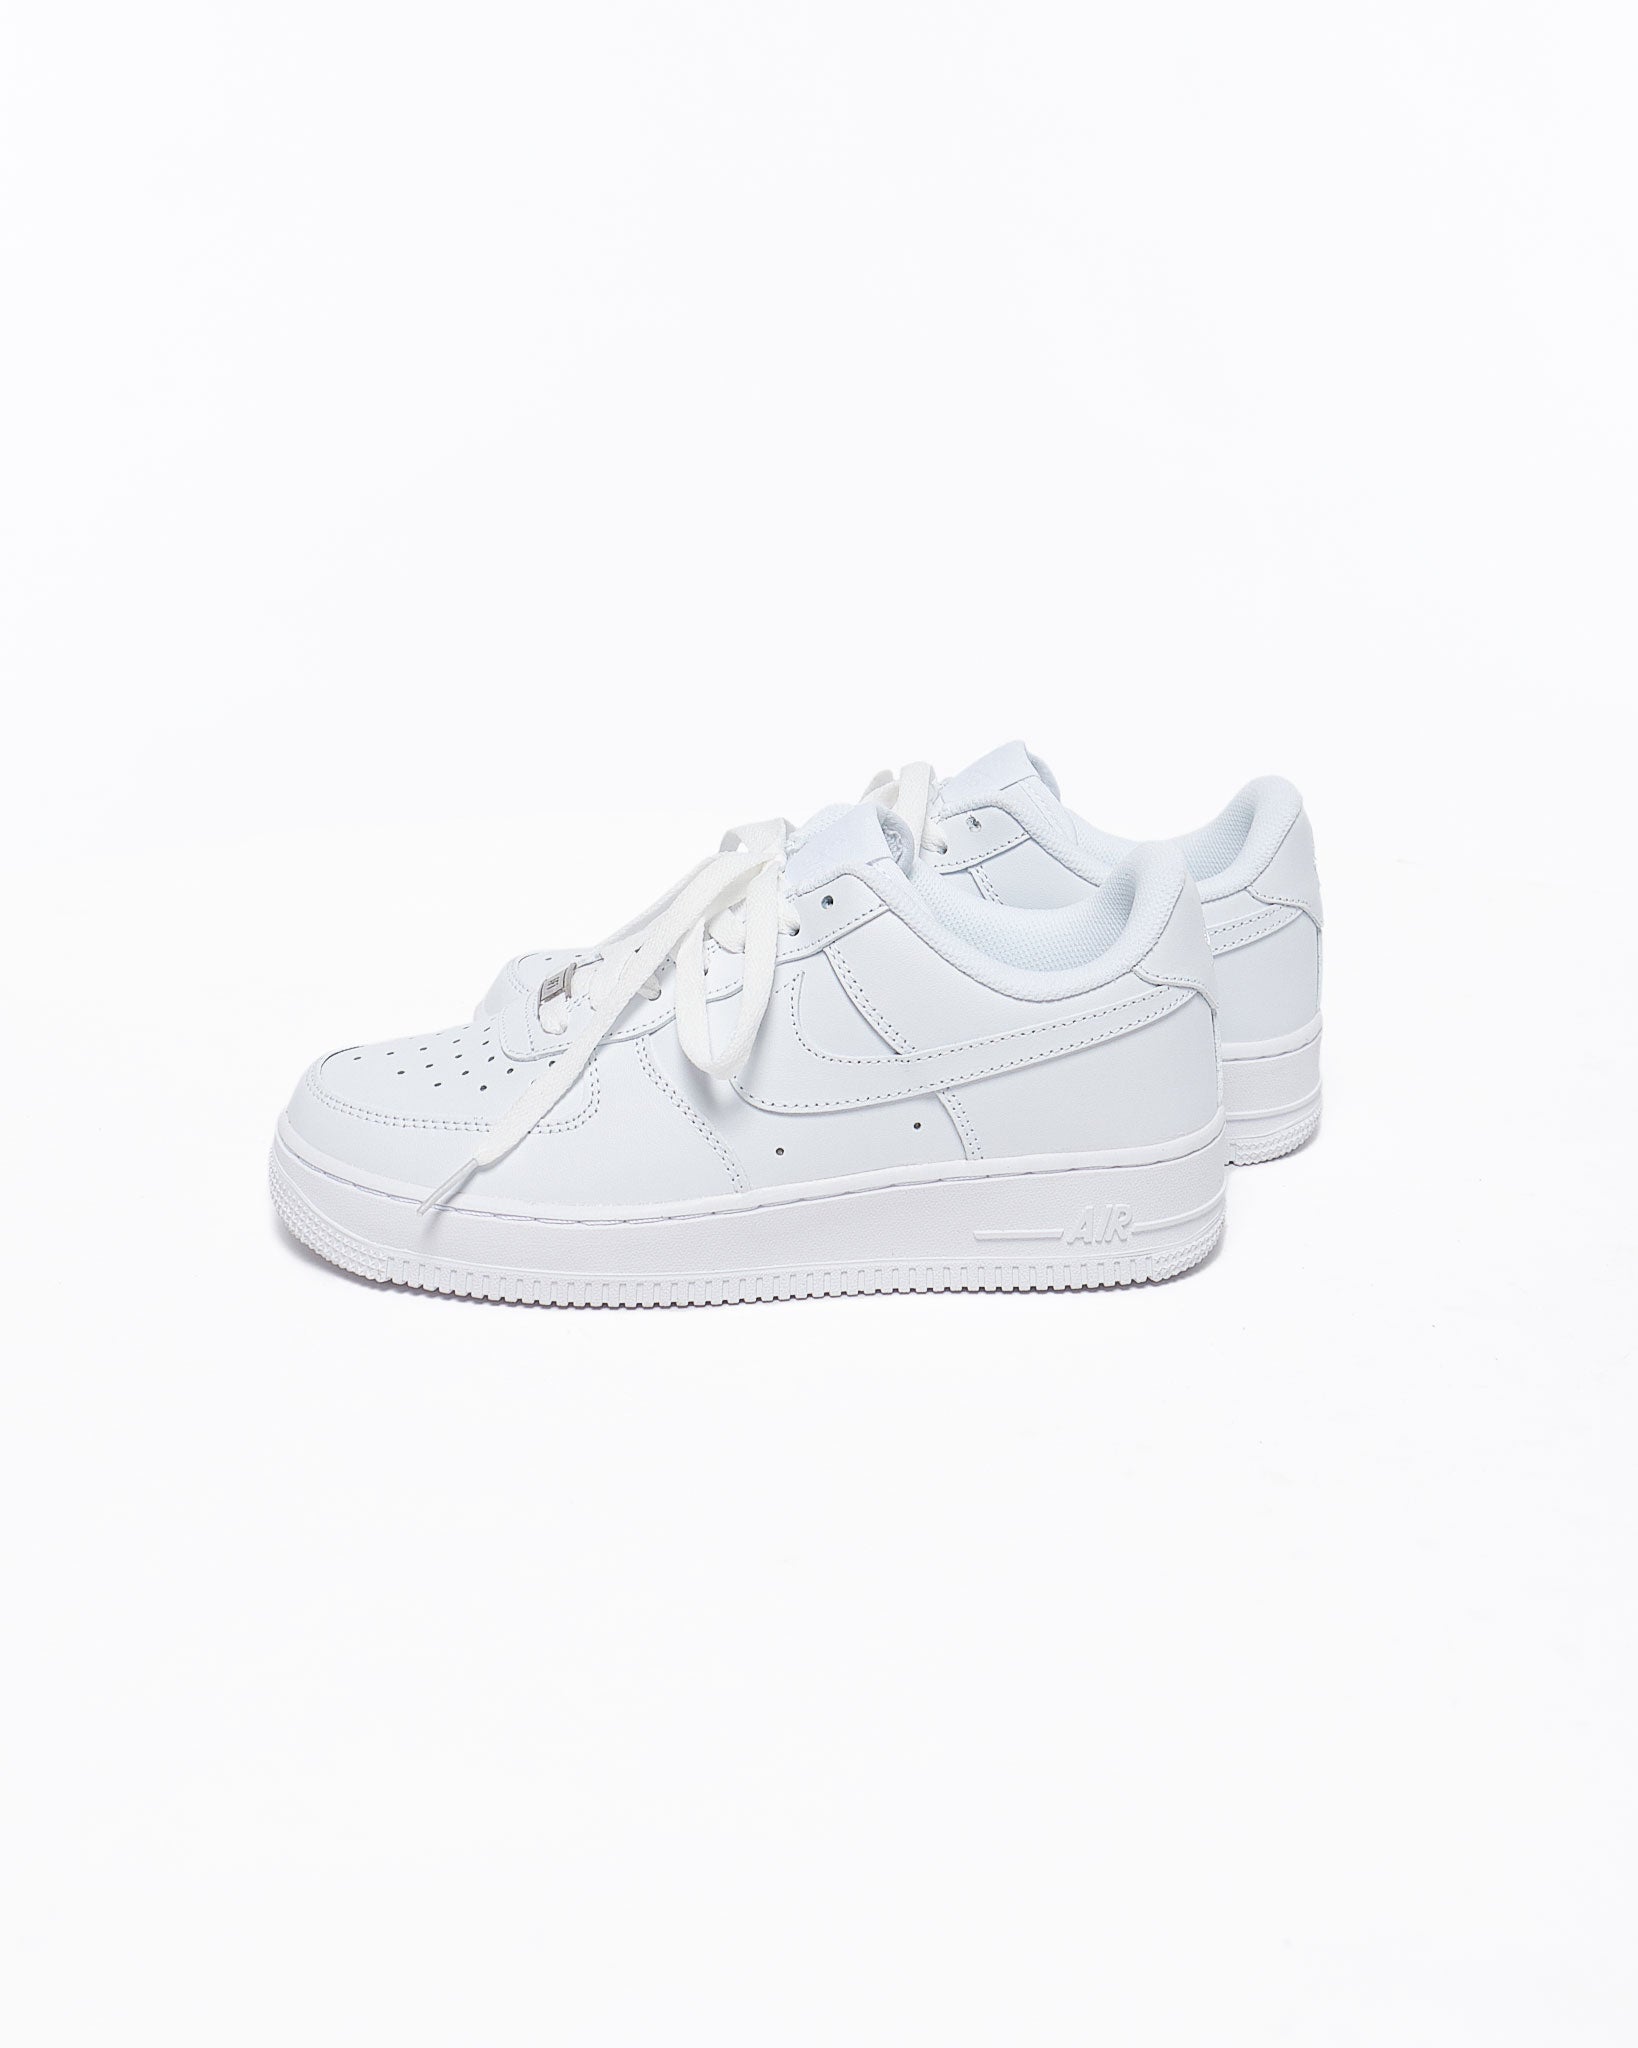 MOI OUTFIT-Air Force 1 Unisex Shoes 56.90